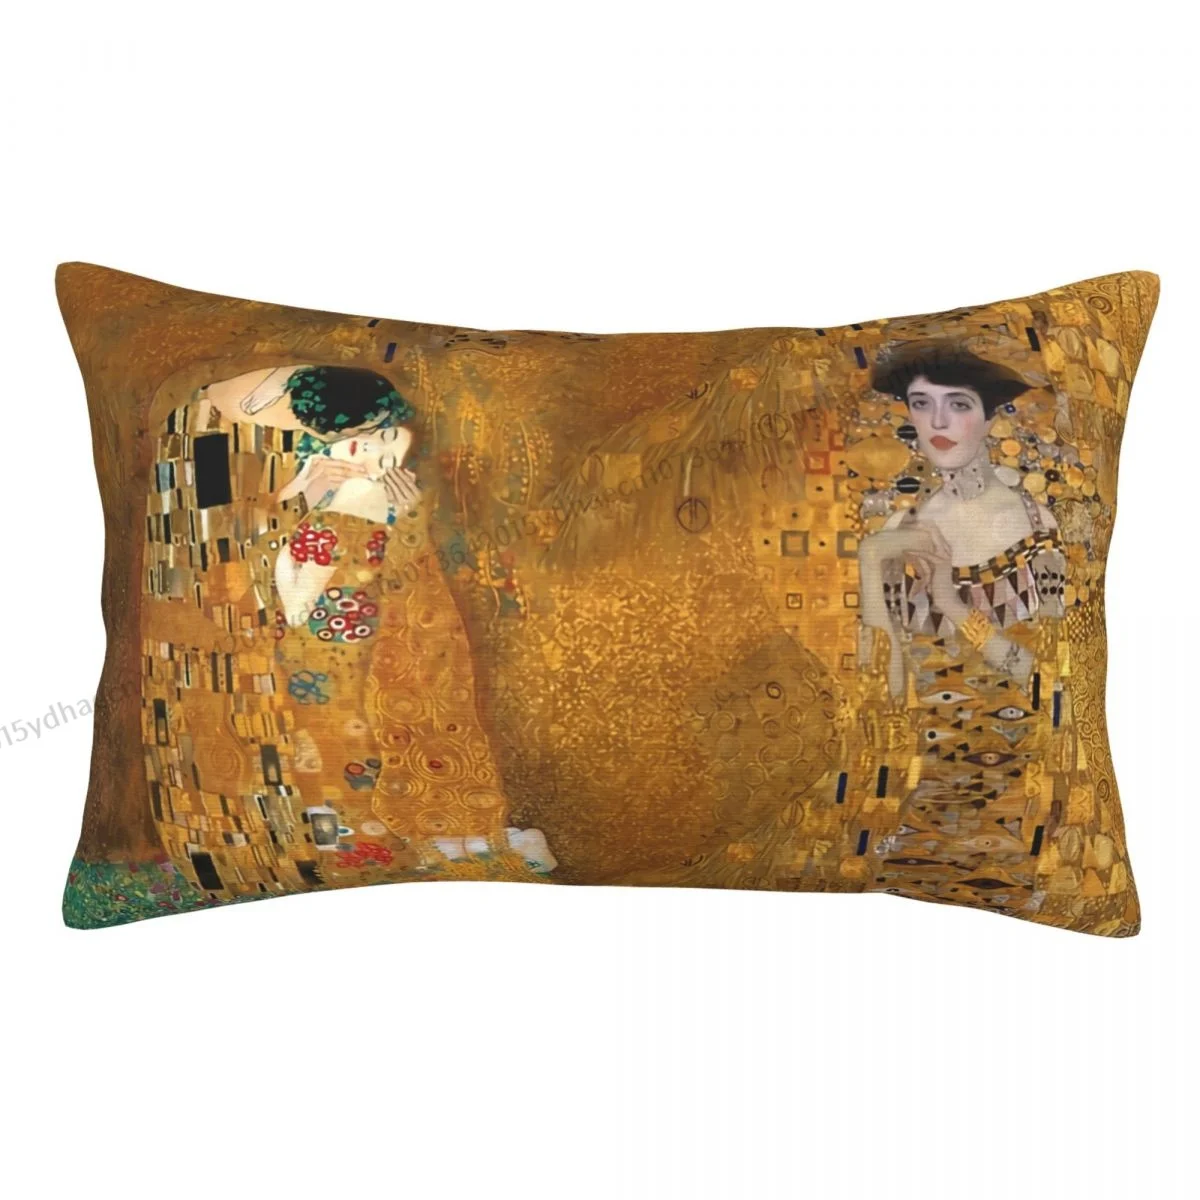 

Woman In Gold Cojines Pillowcase Gustav Klimt Oil Paniting Cushion Home Sofa Chair Print Decorative Coussin Pillow Covers